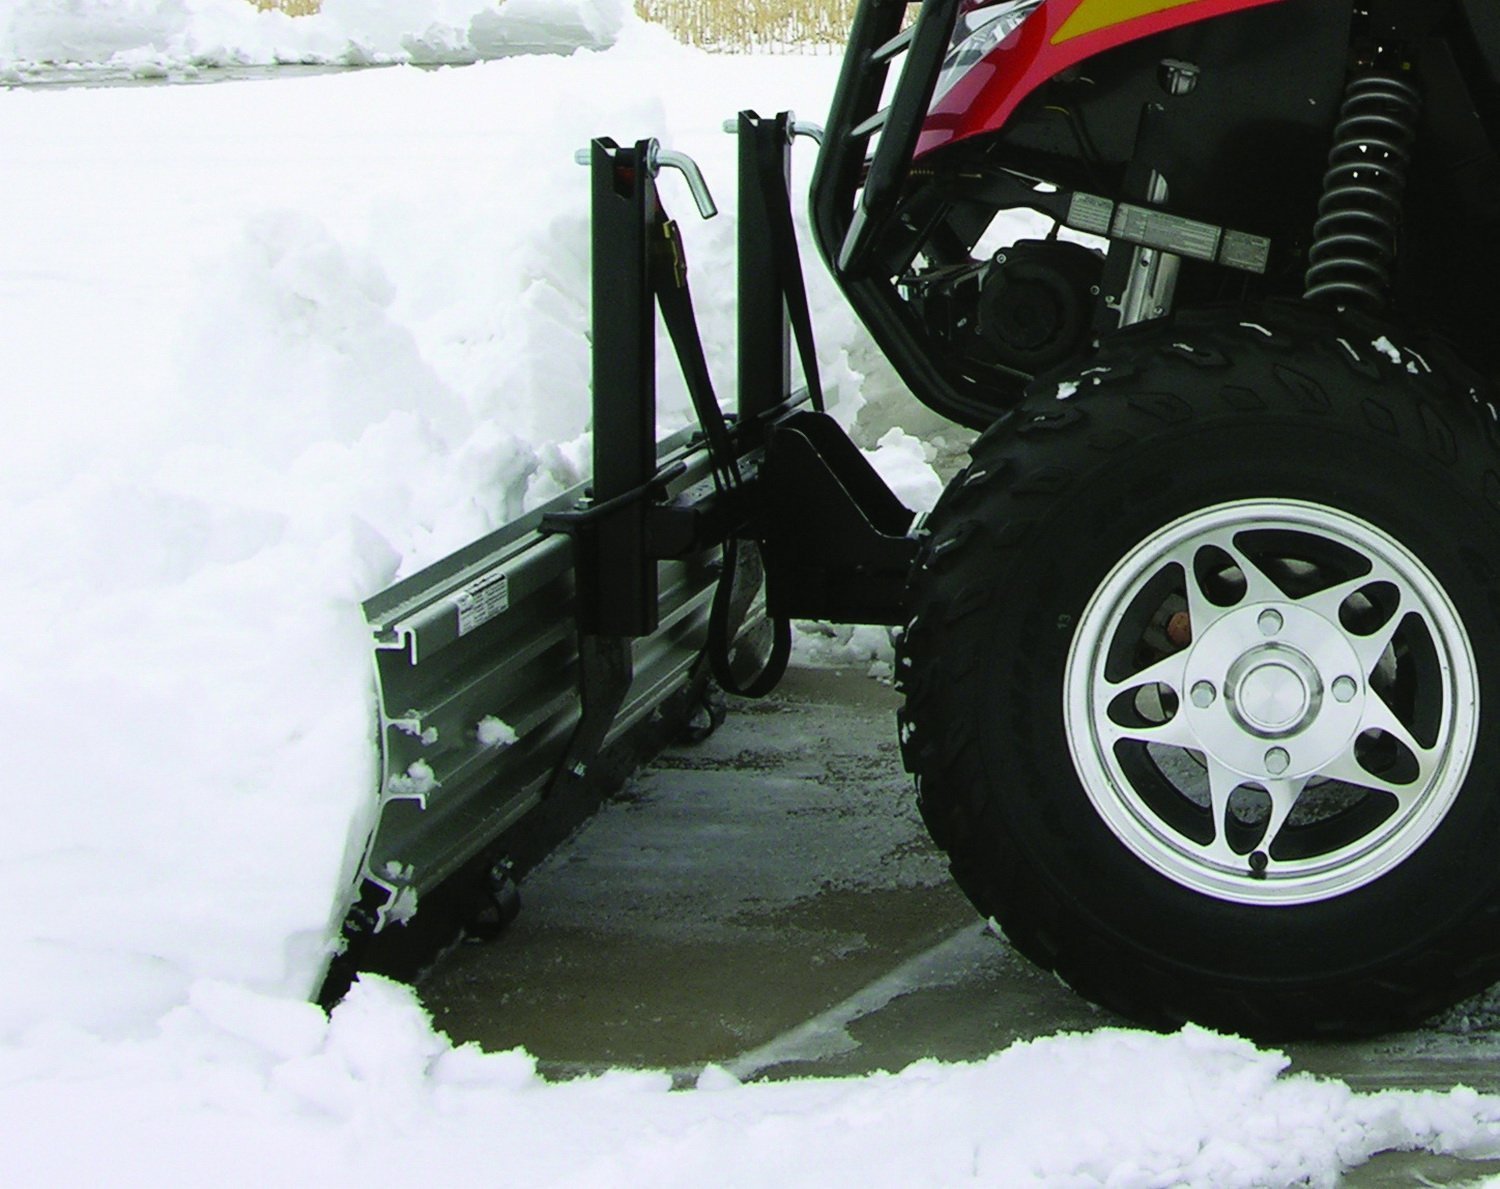 More information about "SnowSport All Terrain Plow Review"